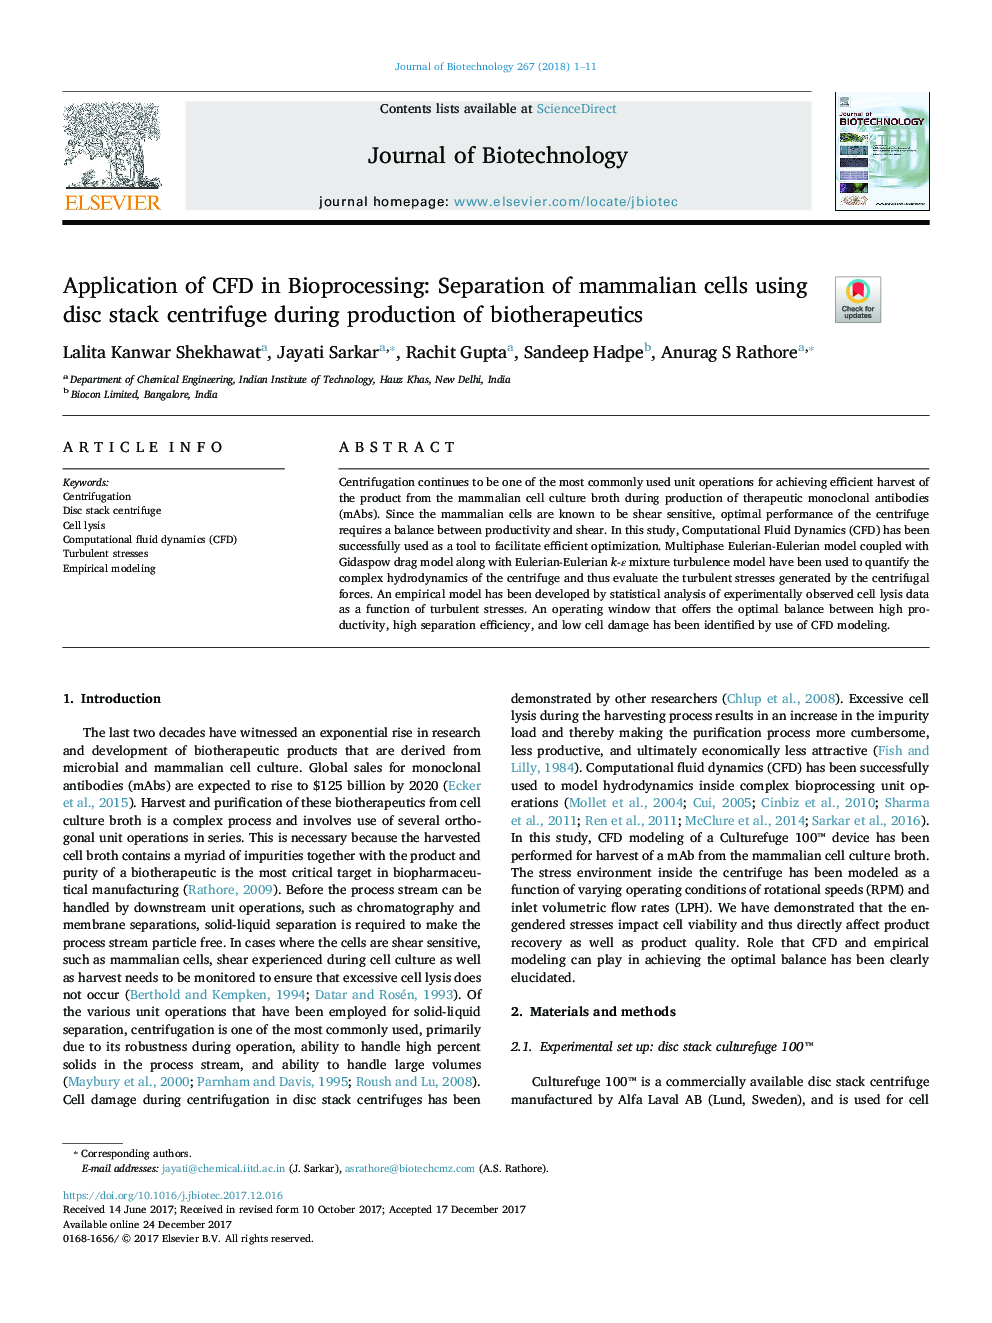 Application of CFD in Bioprocessing: Separation of mammalian cells using disc stack centrifuge during production of biotherapeutics